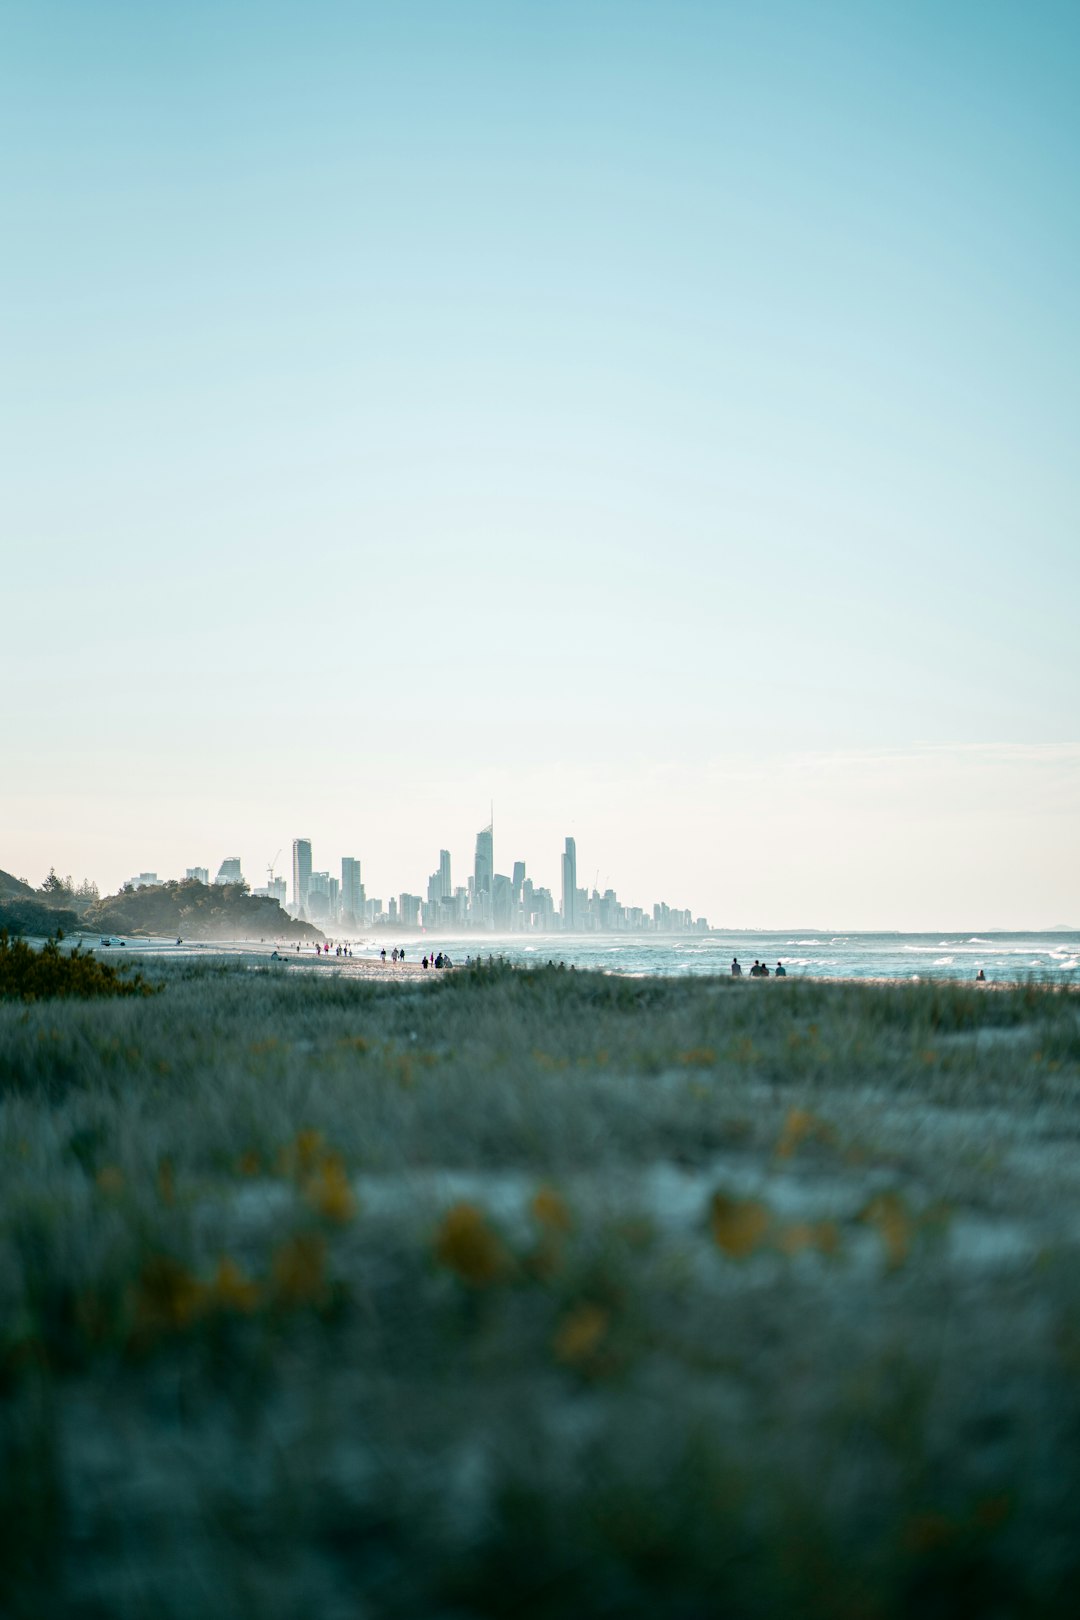 Travel Tips and Stories of Burleigh Heads in Australia